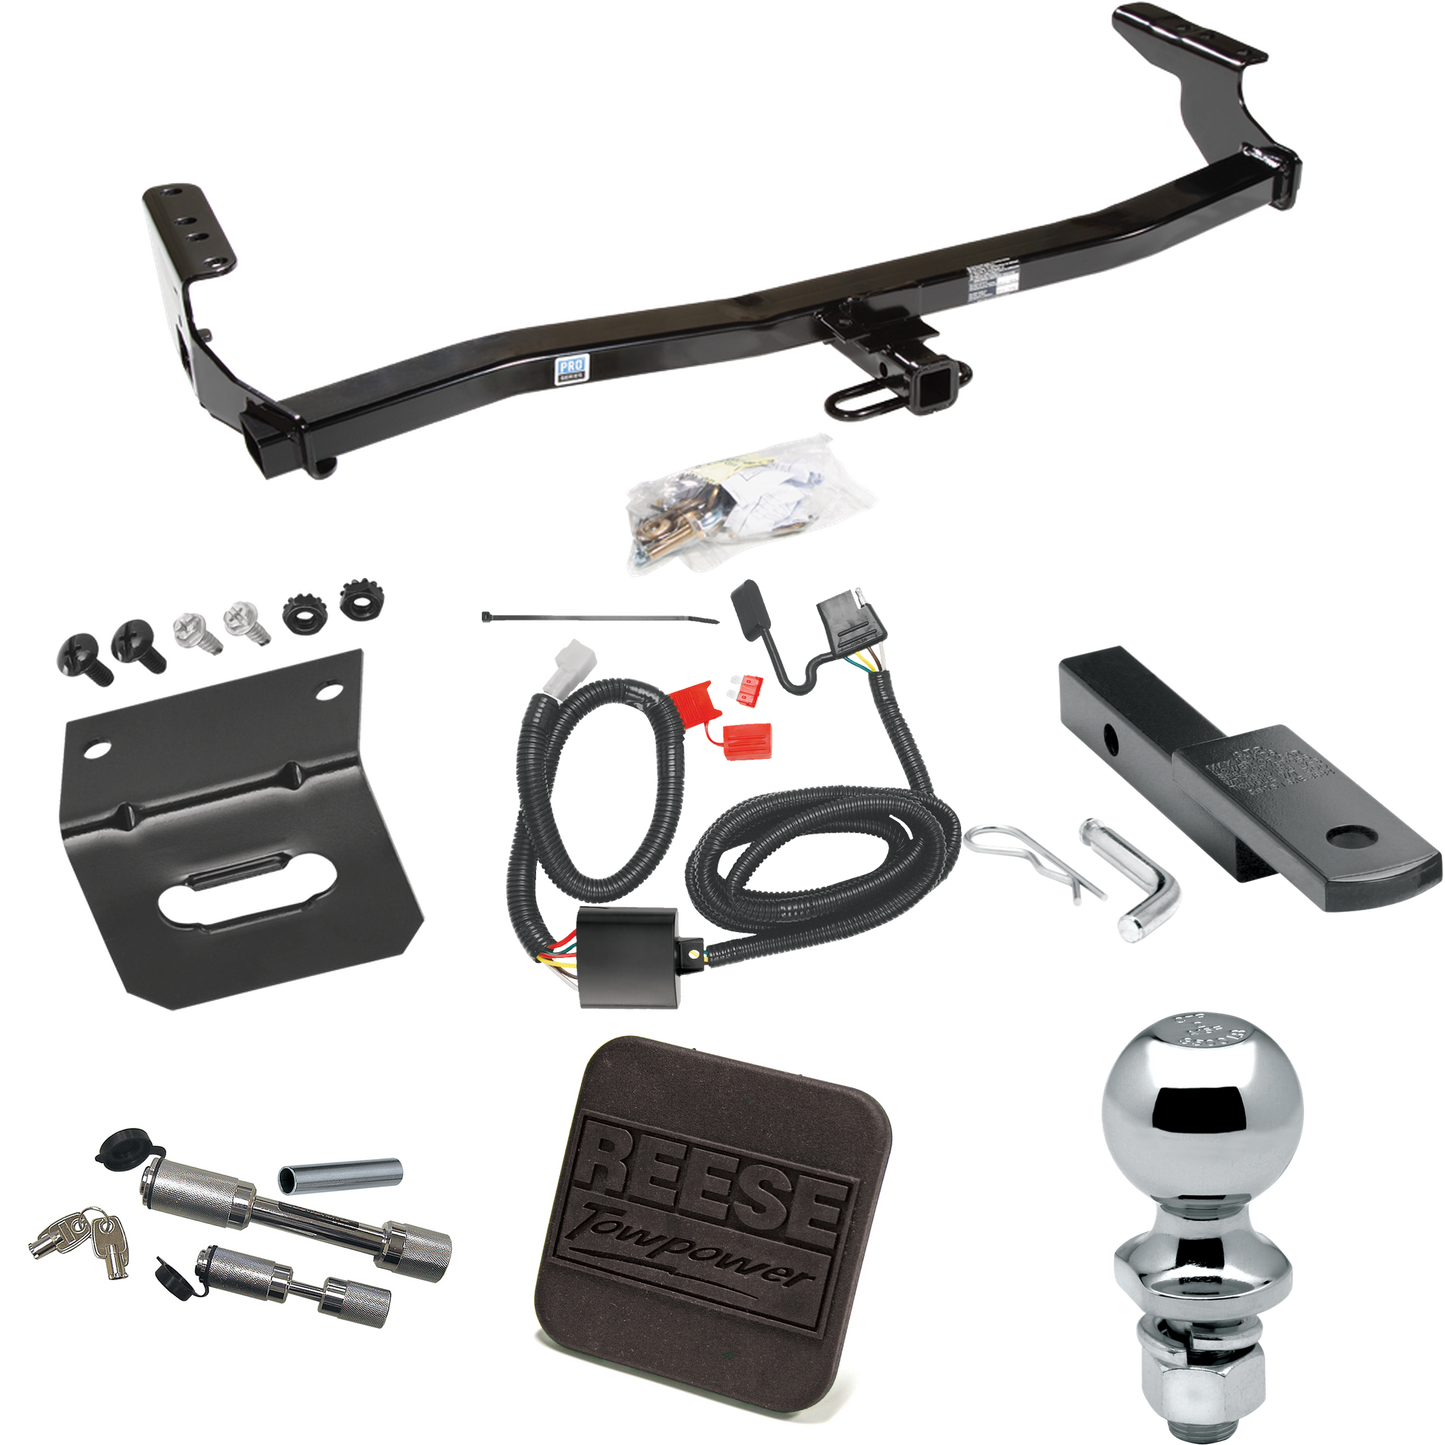 Fits 1998-2008 Subaru Forester Trailer Hitch Tow PKG w/ 4-Flat Wiring Harness + Draw-Bar + 2" Ball + Wiring Bracket + Hitch Cover + Dual Hitch & Coupler Locks By Reese Towpower